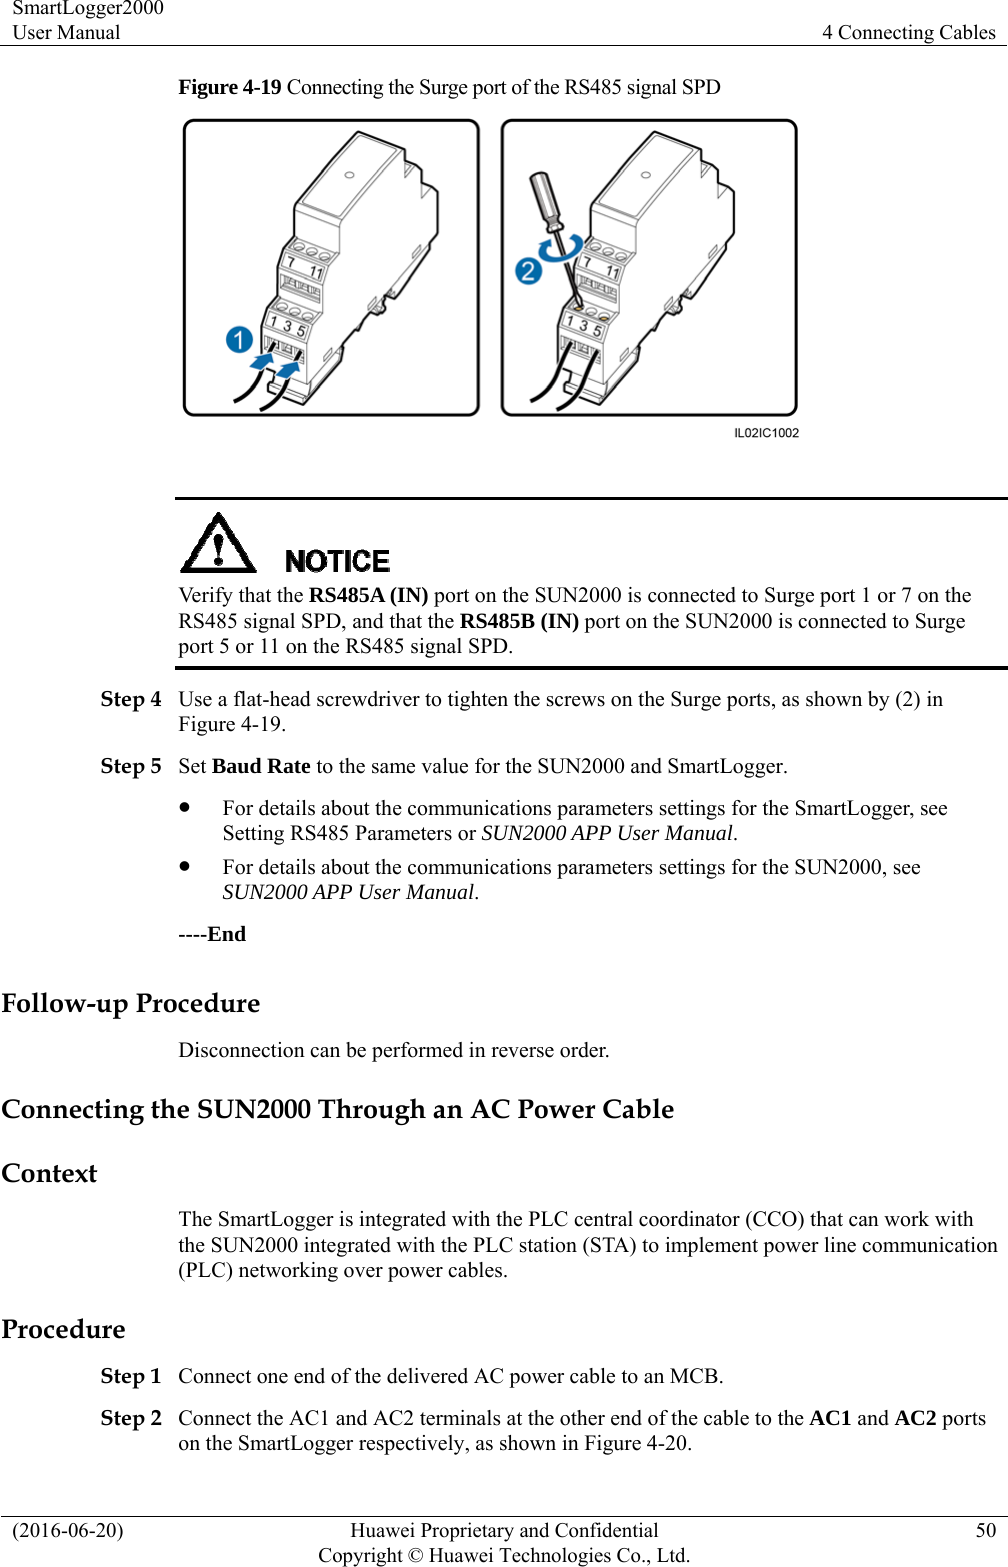 SmartLogger2000 User Manual  4 Connecting Cables (2016-06-20)  Huawei Proprietary and Confidential         Copyright © Huawei Technologies Co., Ltd.50 Figure 4-19 Connecting the Surge port of the RS485 signal SPD    Verify that the RS485A (IN) port on the SUN2000 is connected to Surge port 1 or 7 on the RS485 signal SPD, and that the RS485B (IN) port on the SUN2000 is connected to Surge port 5 or 11 on the RS485 signal SPD.   Step 4 Use a flat-head screwdriver to tighten the screws on the Surge ports, as shown by (2) in Figure 4-19. Step 5 Set Baud Rate to the same value for the SUN2000 and SmartLogger.  For details about the communications parameters settings for the SmartLogger, see Setting RS485 Parameters or SUN2000 APP User Manual.   For details about the communications parameters settings for the SUN2000, see SUN2000 APP User Manual. ----End Follow-up Procedure Disconnection can be performed in reverse order. Connecting the SUN2000 Through an AC Power Cable Context The SmartLogger is integrated with the PLC central coordinator (CCO) that can work with the SUN2000 integrated with the PLC station (STA) to implement power line communication (PLC) networking over power cables. Procedure Step 1 Connect one end of the delivered AC power cable to an MCB.   Step 2 Connect the AC1 and AC2 terminals at the other end of the cable to the AC1 and AC2 ports on the SmartLogger respectively, as shown in Figure 4-20. 